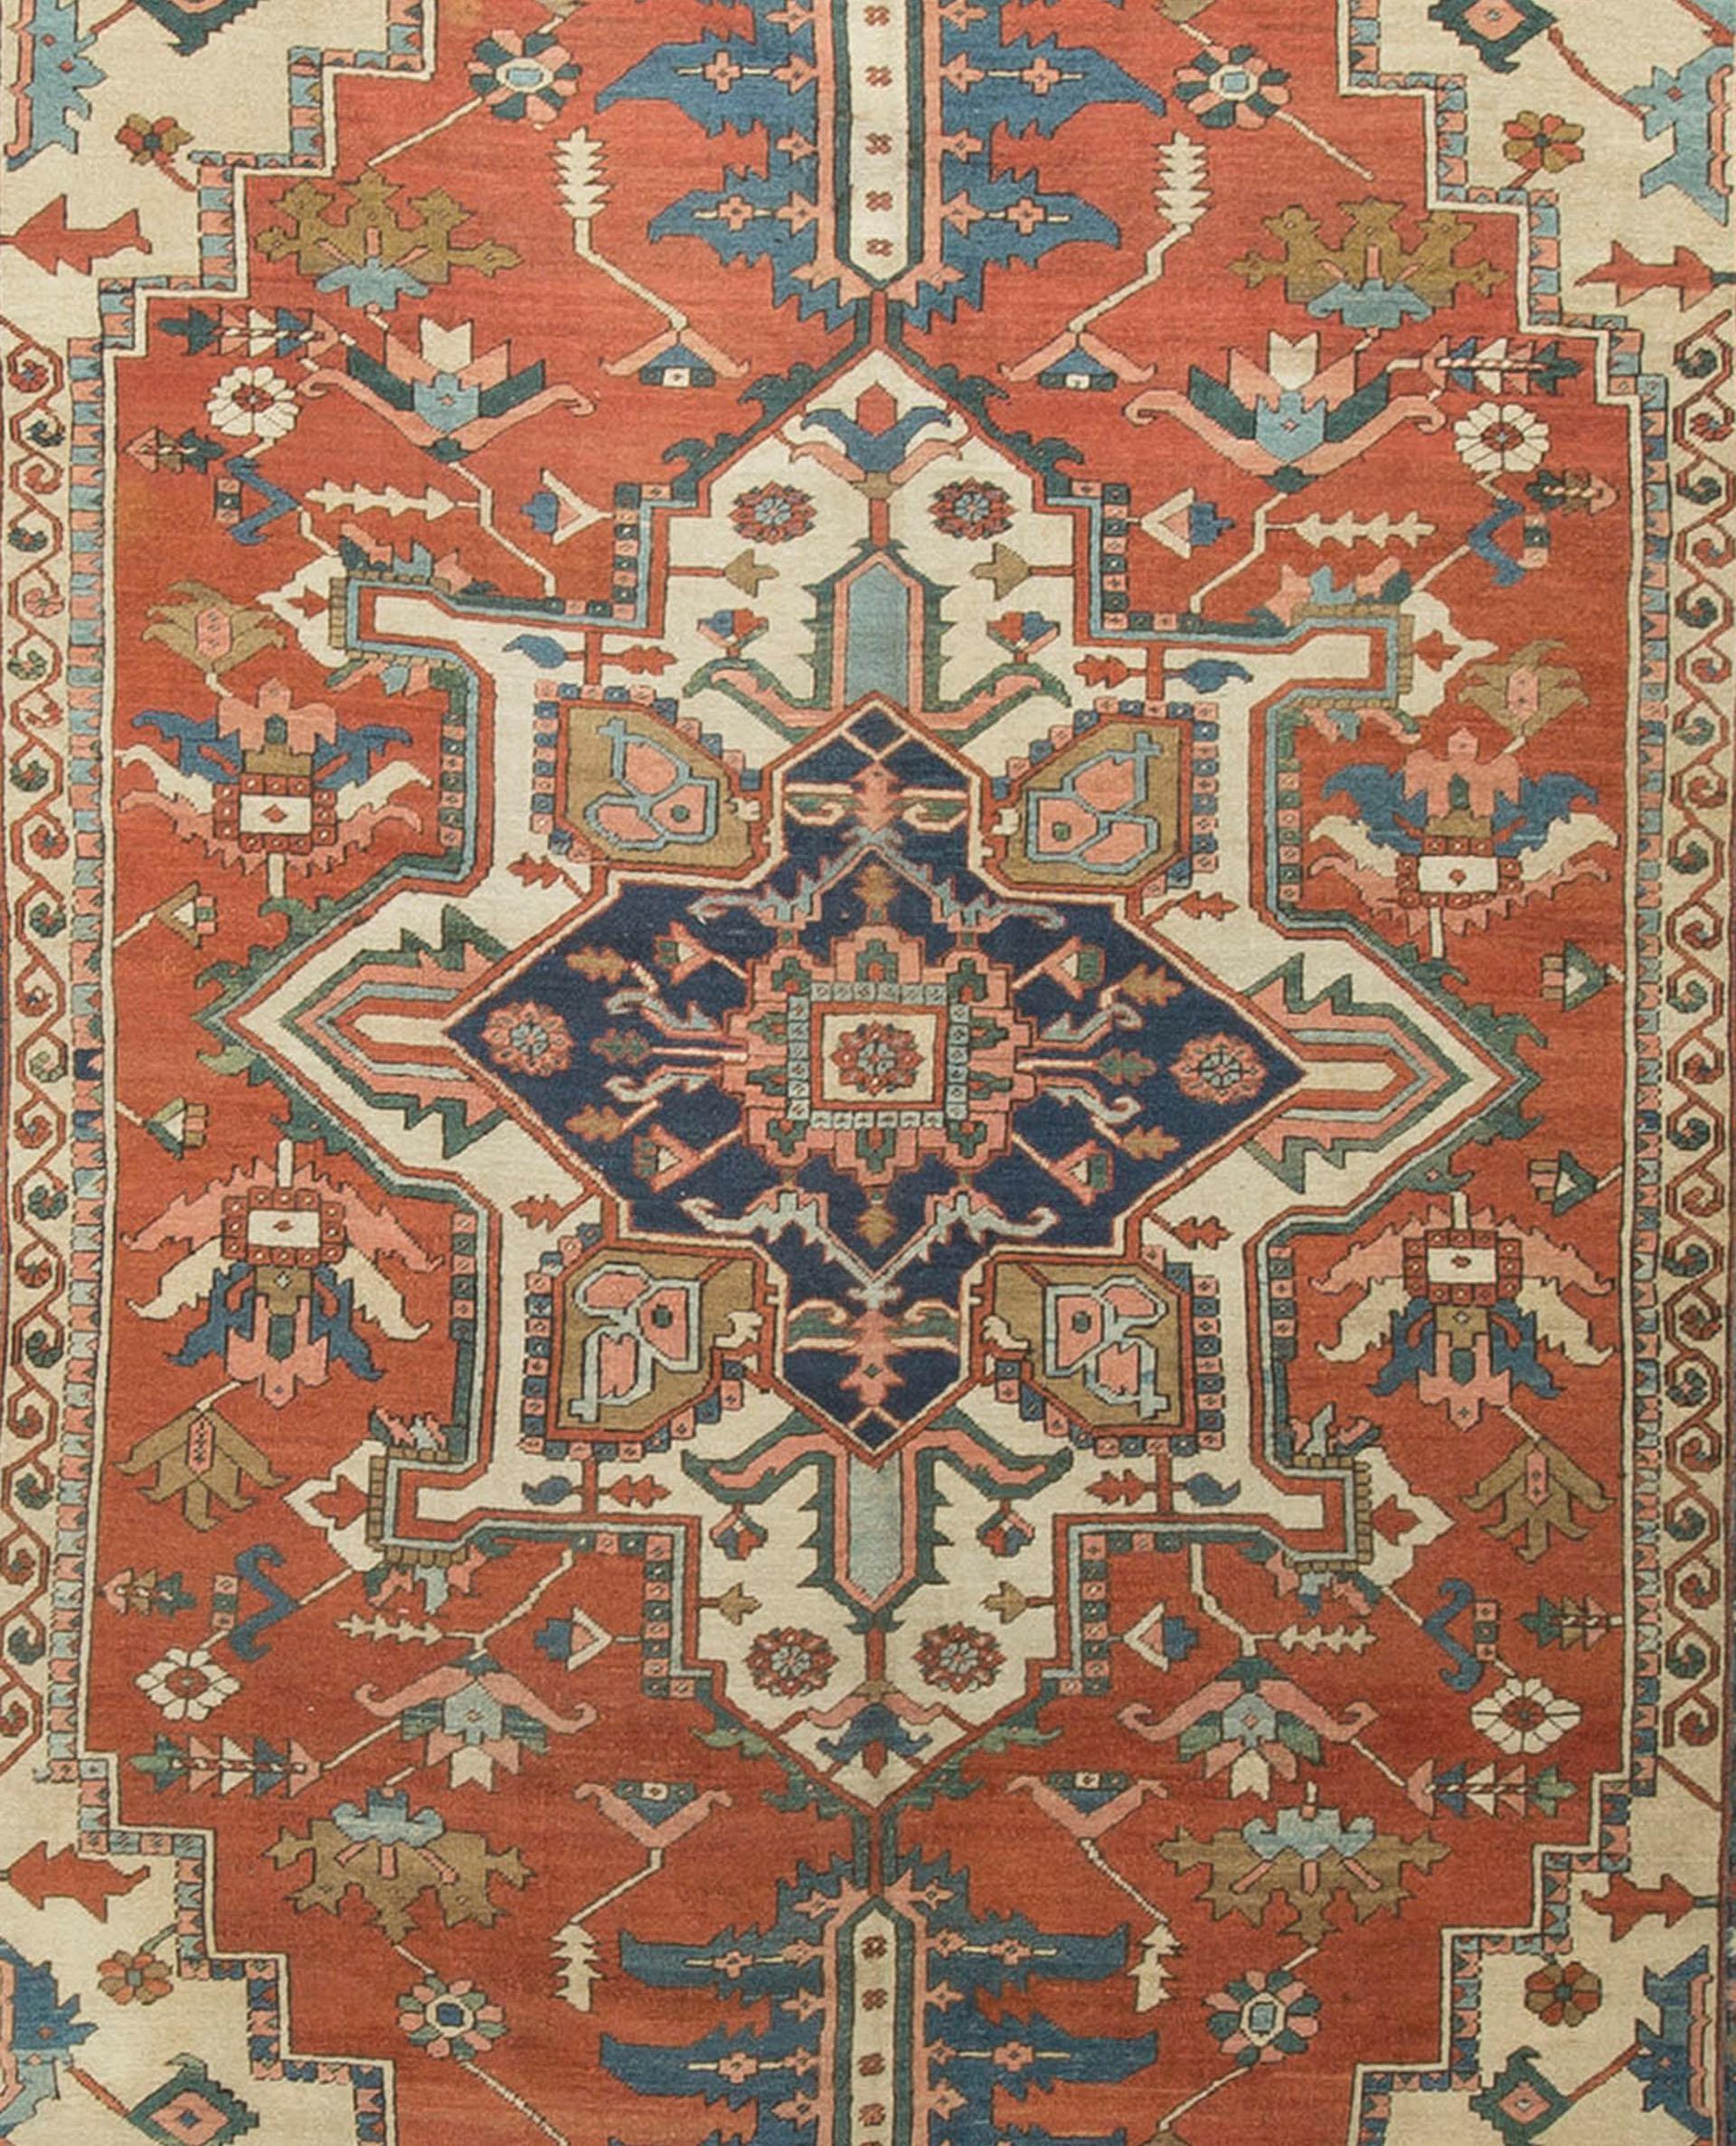 Persian Heriz Serapi Rug Carpet, circa 1890 9'1 x 13'7. The central blue and ivory medallion is so cleverly surrounded by a rust colored field with floral designs and the four corner spandrels in ivory help bring this piece to life. Enclosed by a